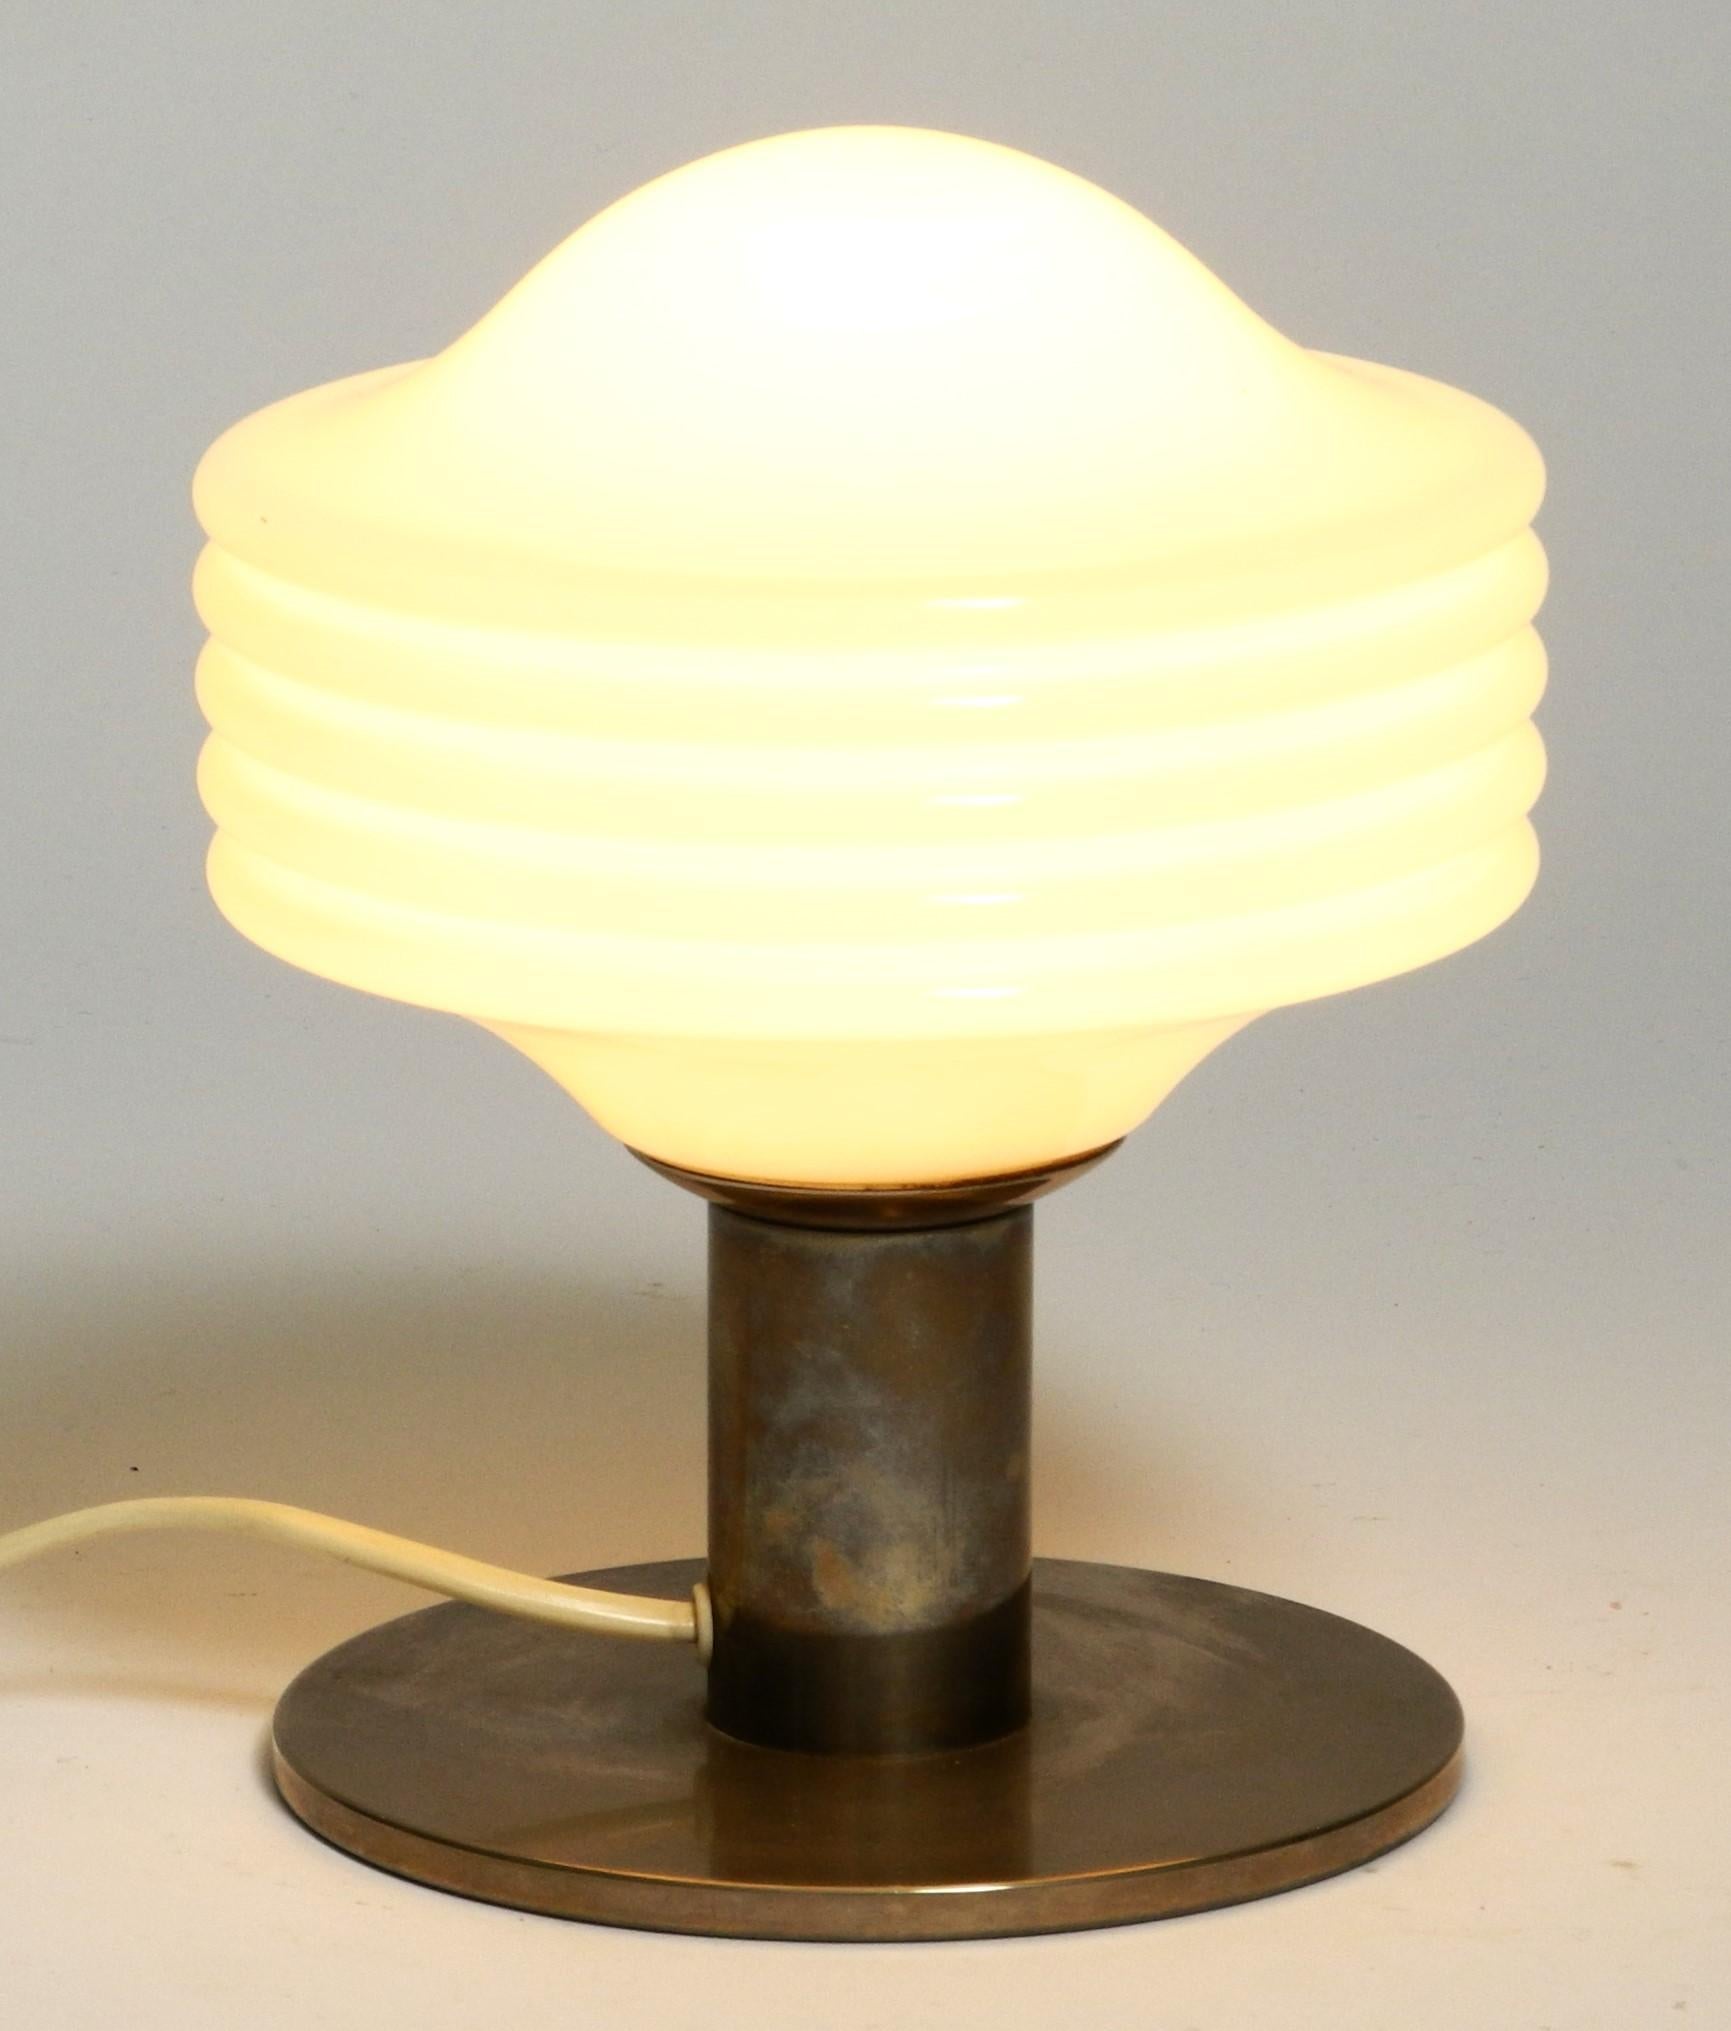 Pretty little Space Age table lamp from Temde Leuchten, Switzerland 1970s.

The lamp has a heavy chrome-plated lamp base and a glass shade made of opal glass. The chrome plating is tarnished and gives the lamp a beautiful patina. 

No damage, fully